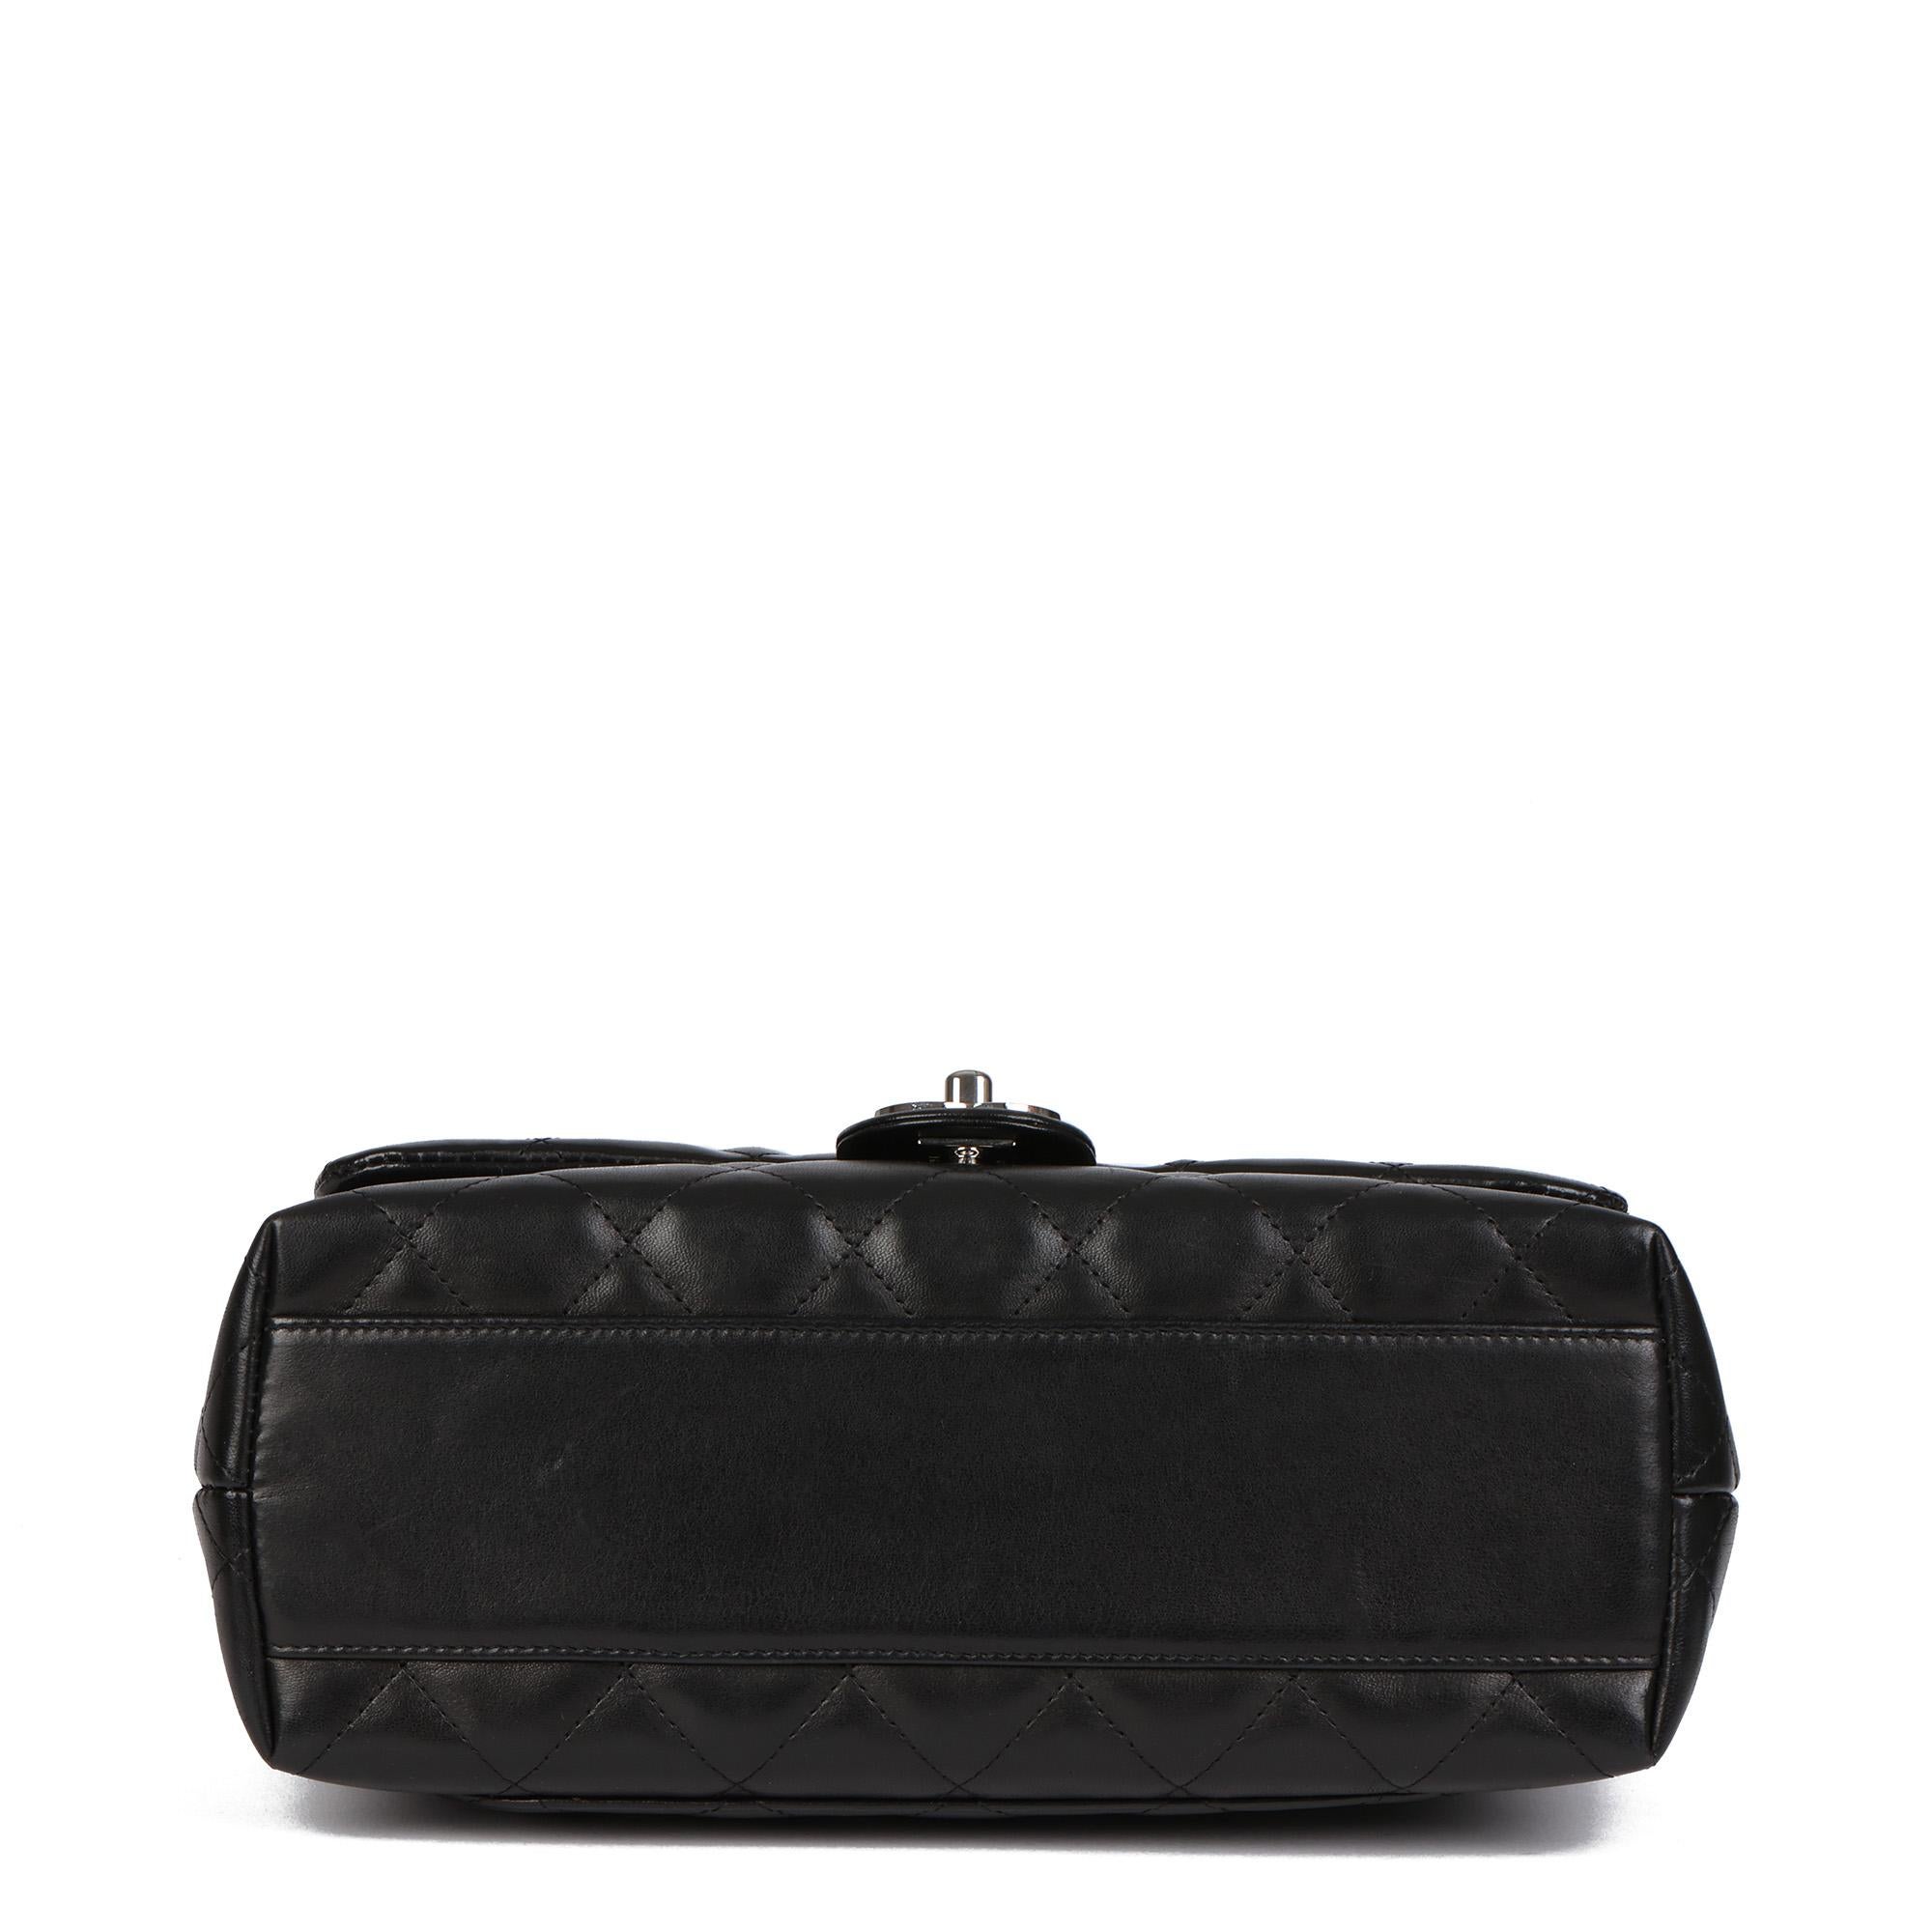 CHANEL Black Quilted Lambskin Classic Kelly 2